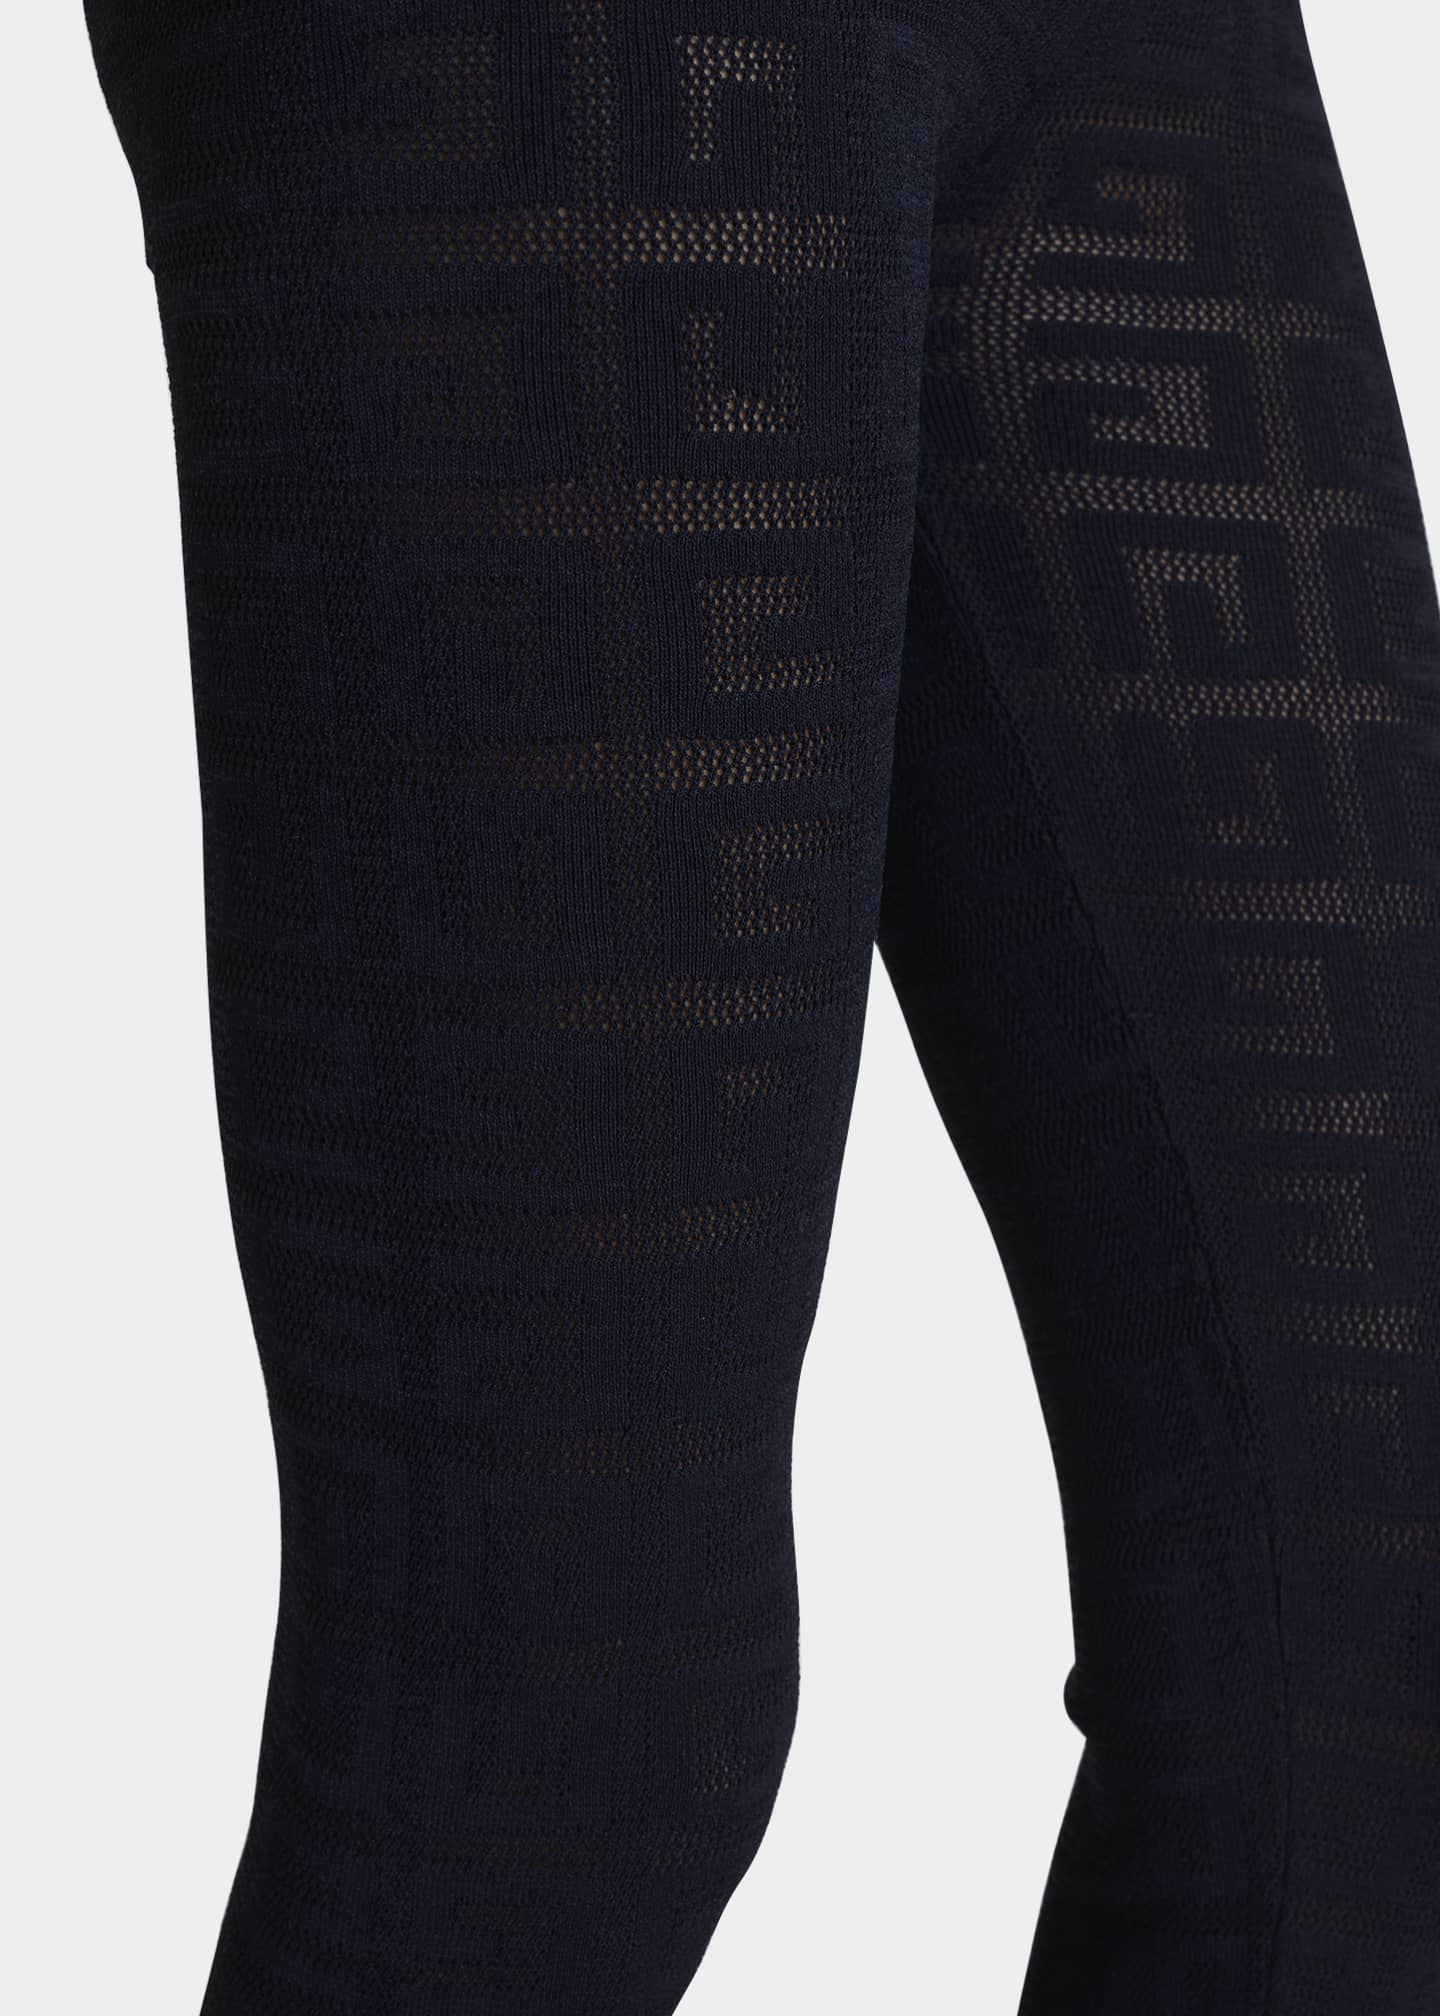 Givenchy Leggings w2c? No luck with reverse image search : r